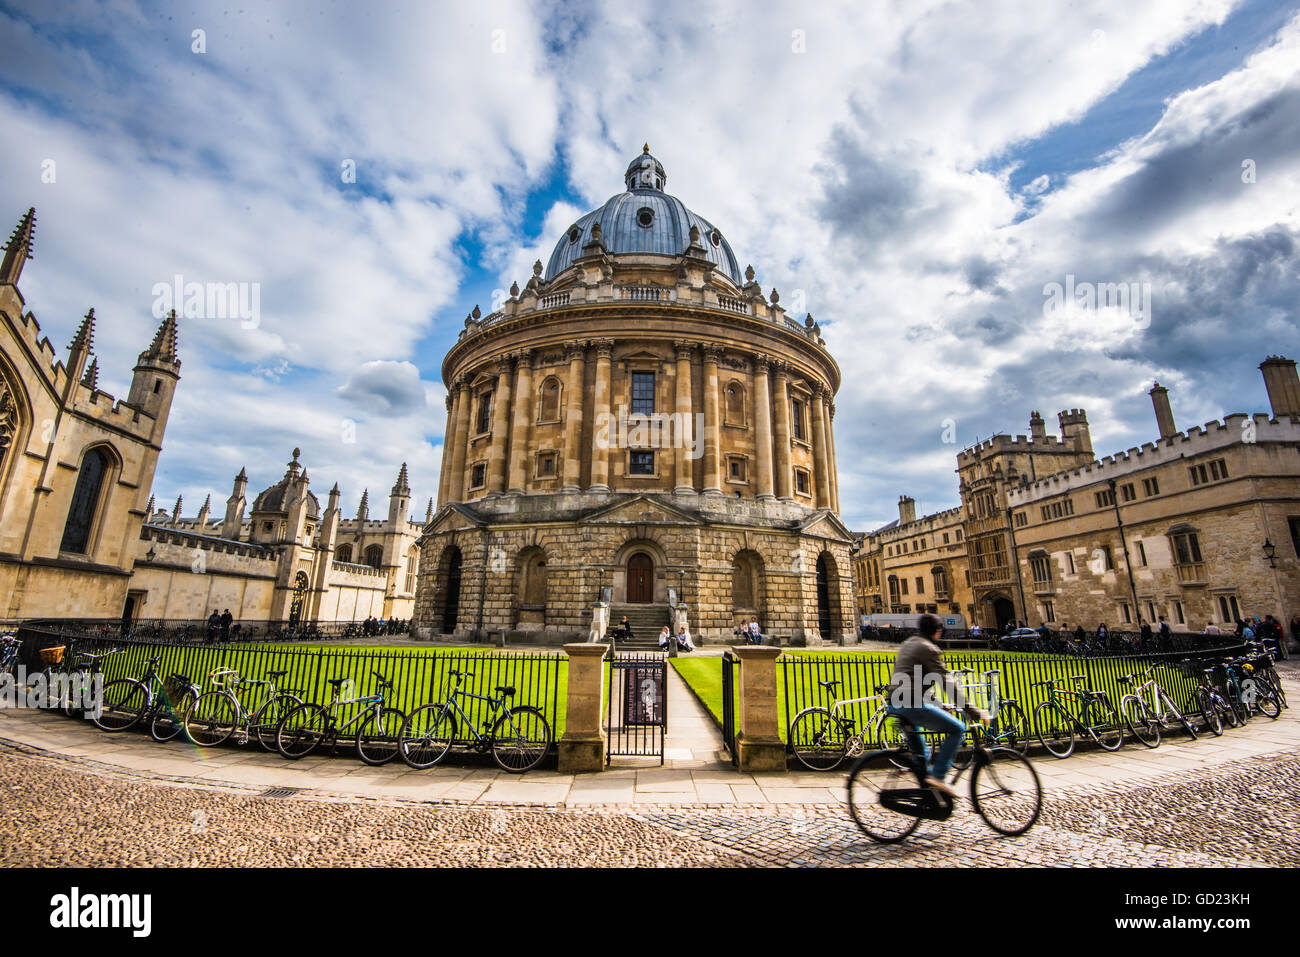 Radcliffe Camera avec cycliste, Oxford, Oxfordshire, Angleterre, Royaume-Uni, Europe Banque D'Images